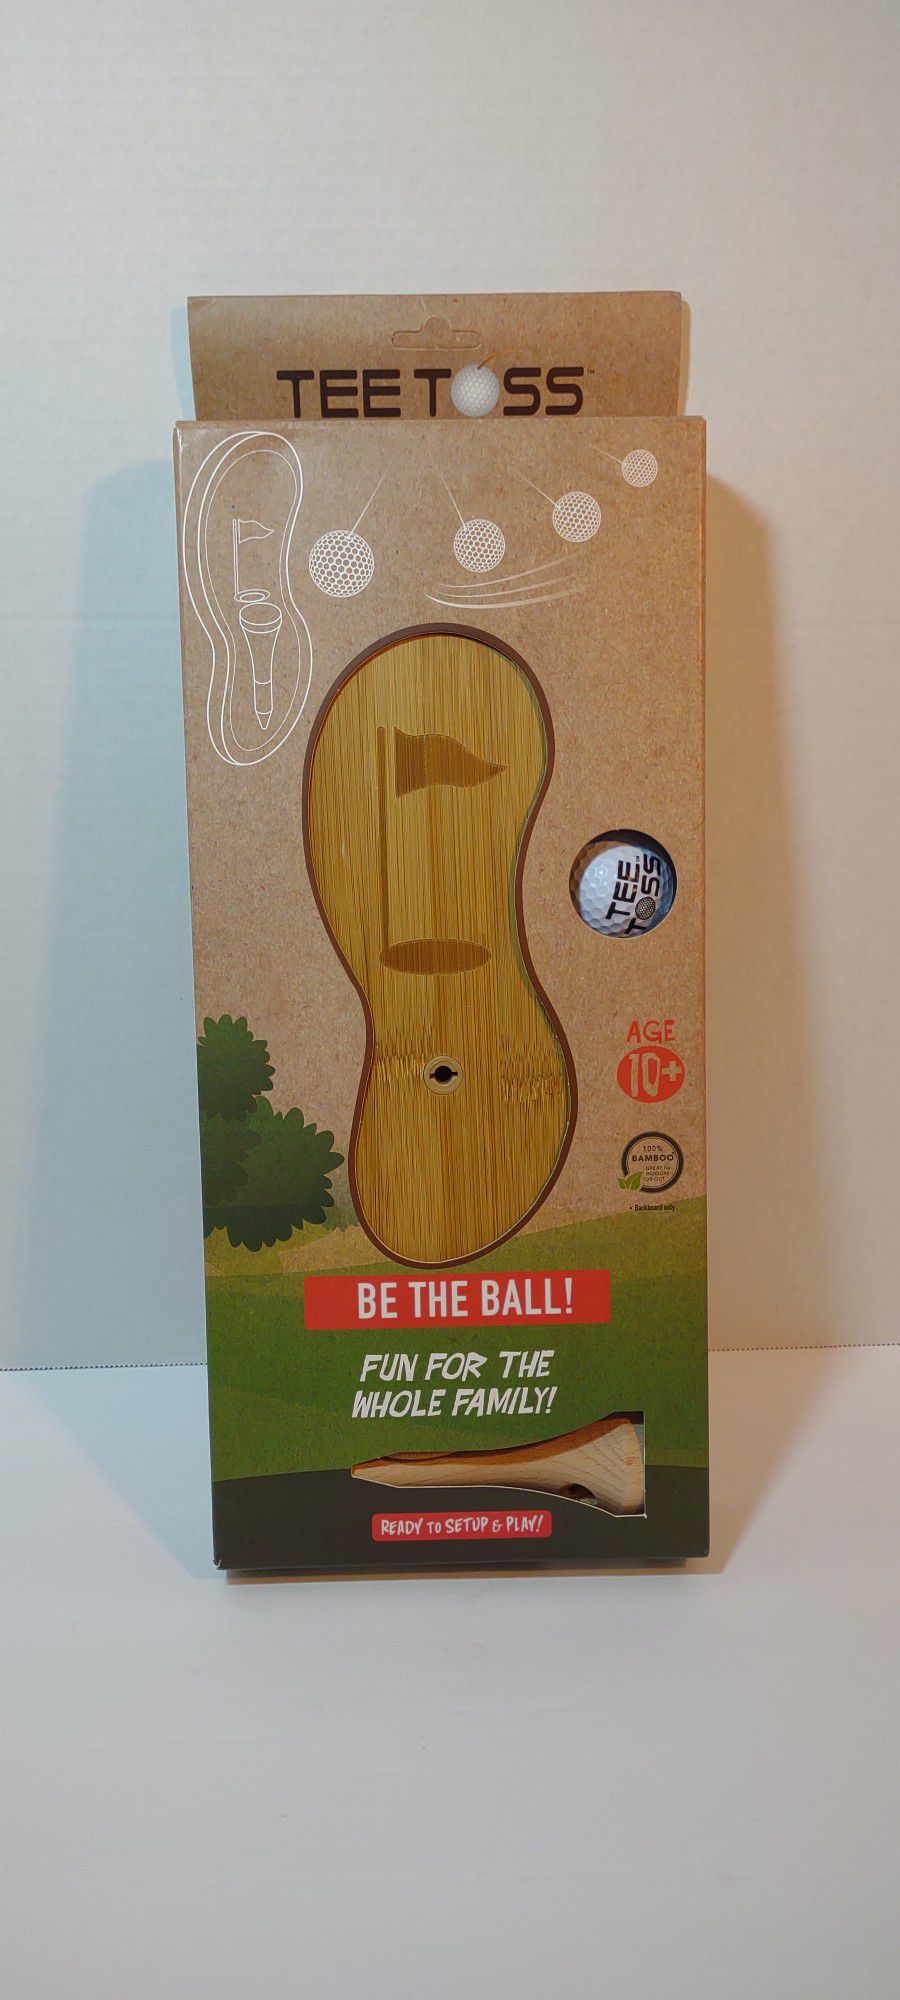 Tee Toss Swing And Putt Game Family Game 10+ Golf Lover Gift 